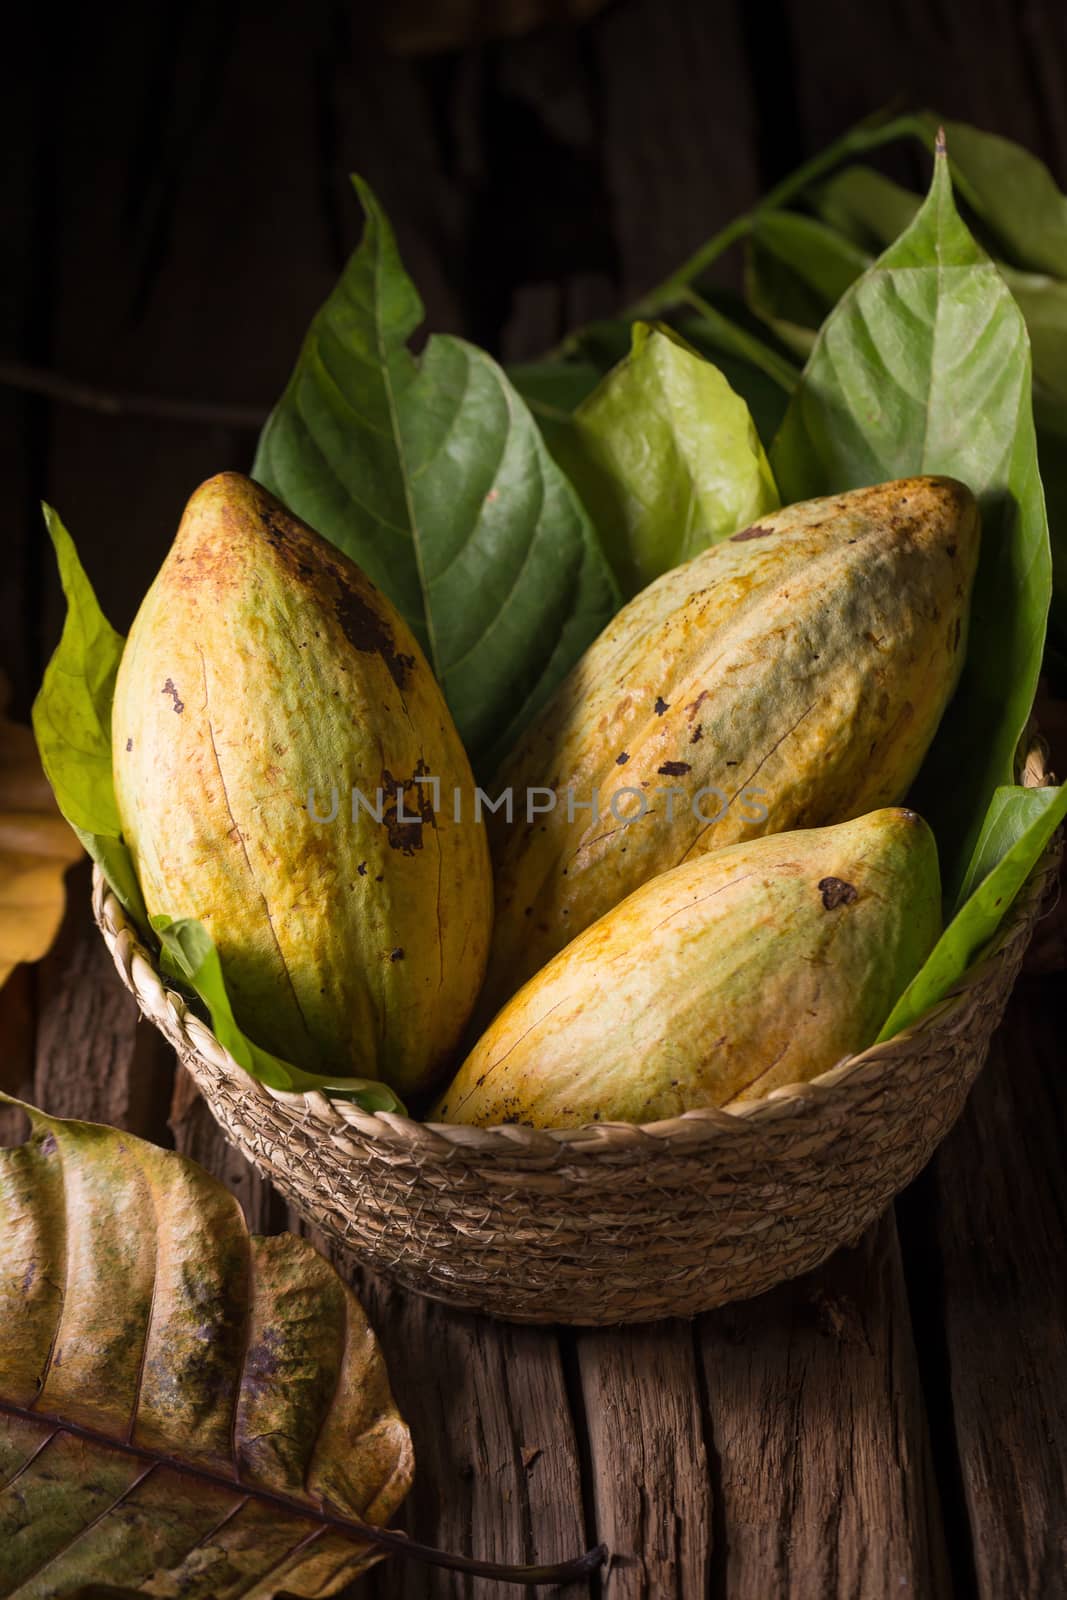 Cacao fruit, raw cacao beans, Cocoa pod on wooden background. by kaiskynet